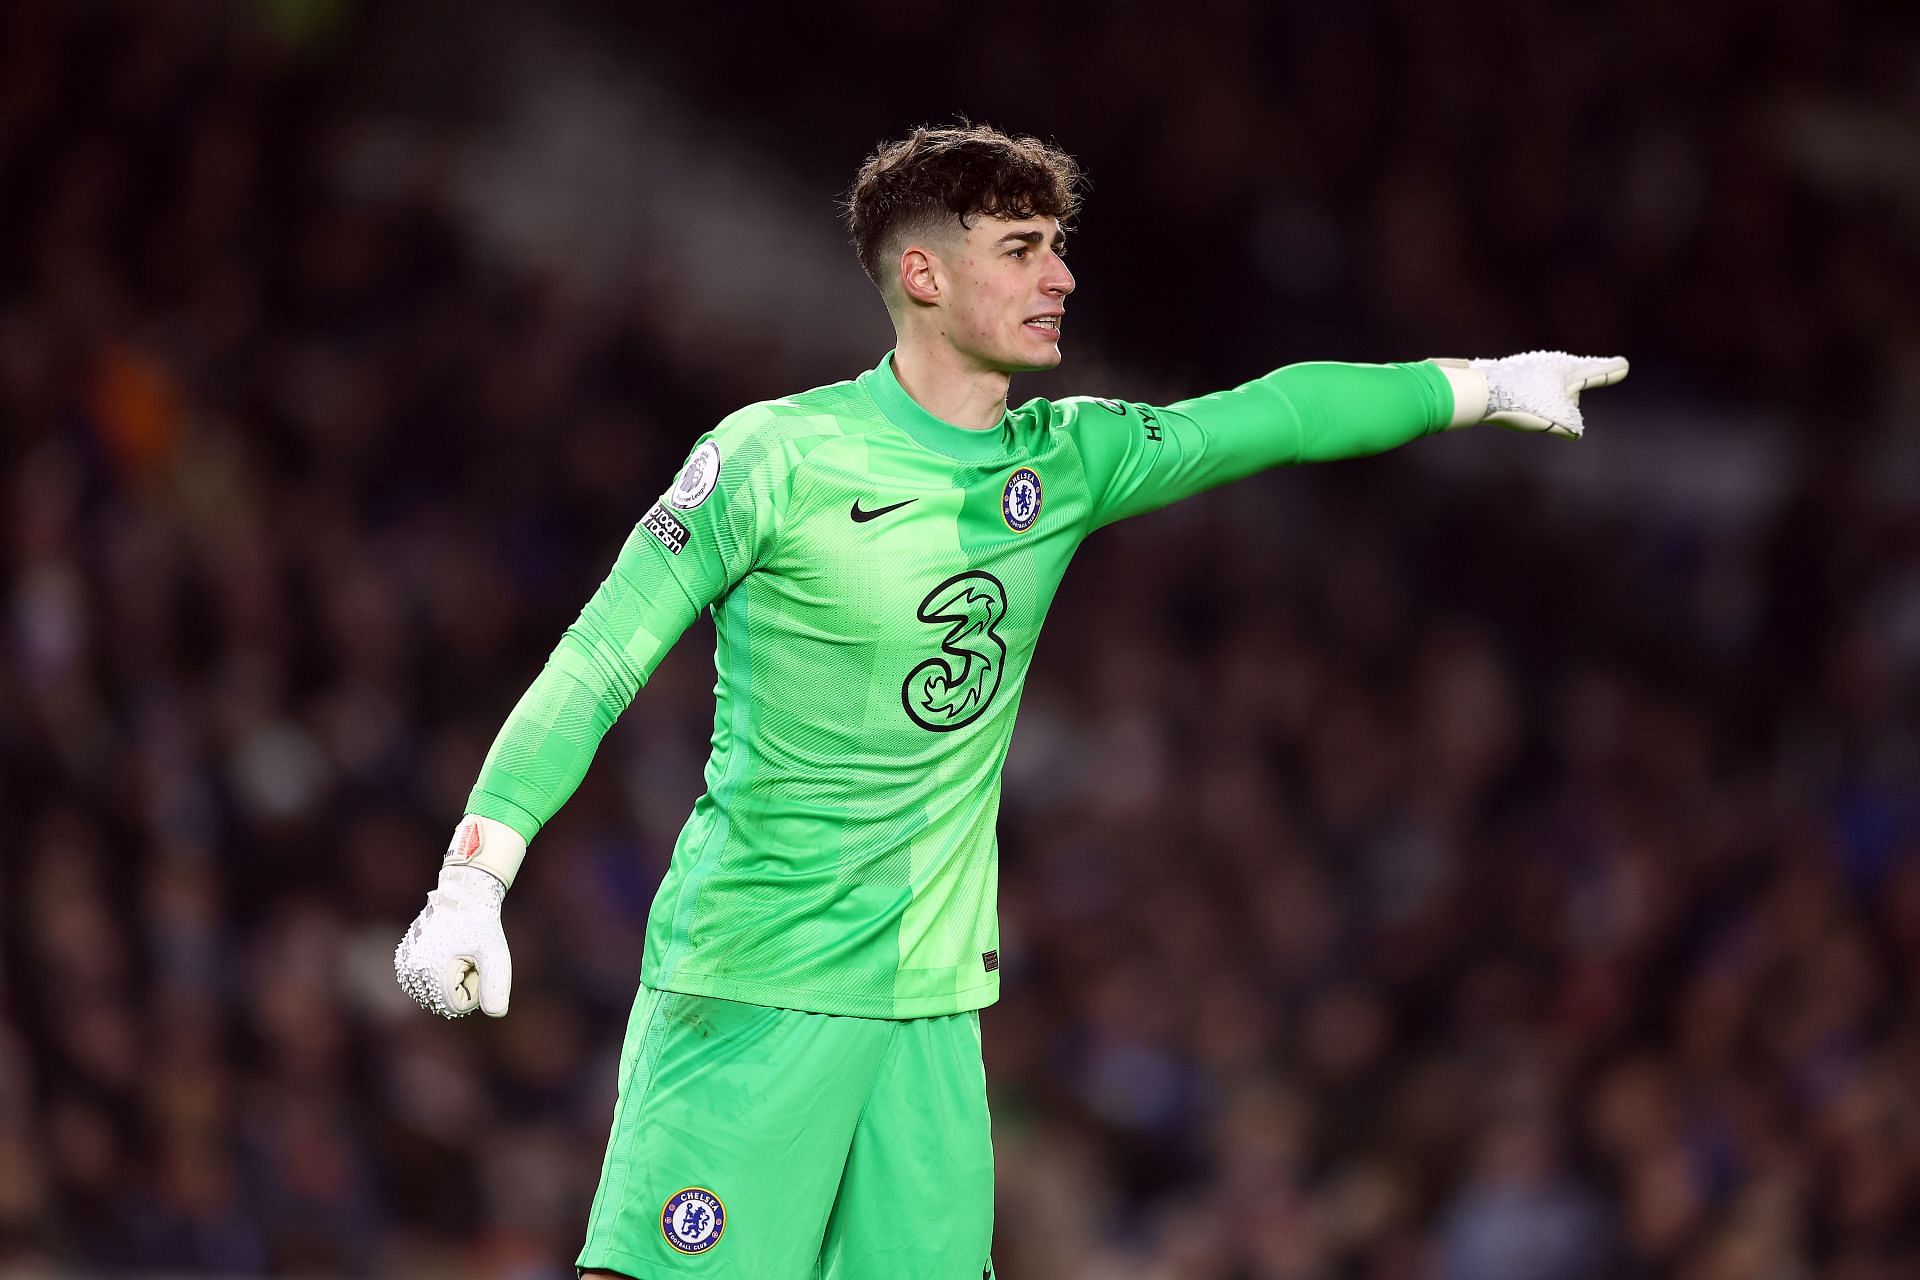 Kepa Arrizabalaga could be on his way out of Stamford Bridge.